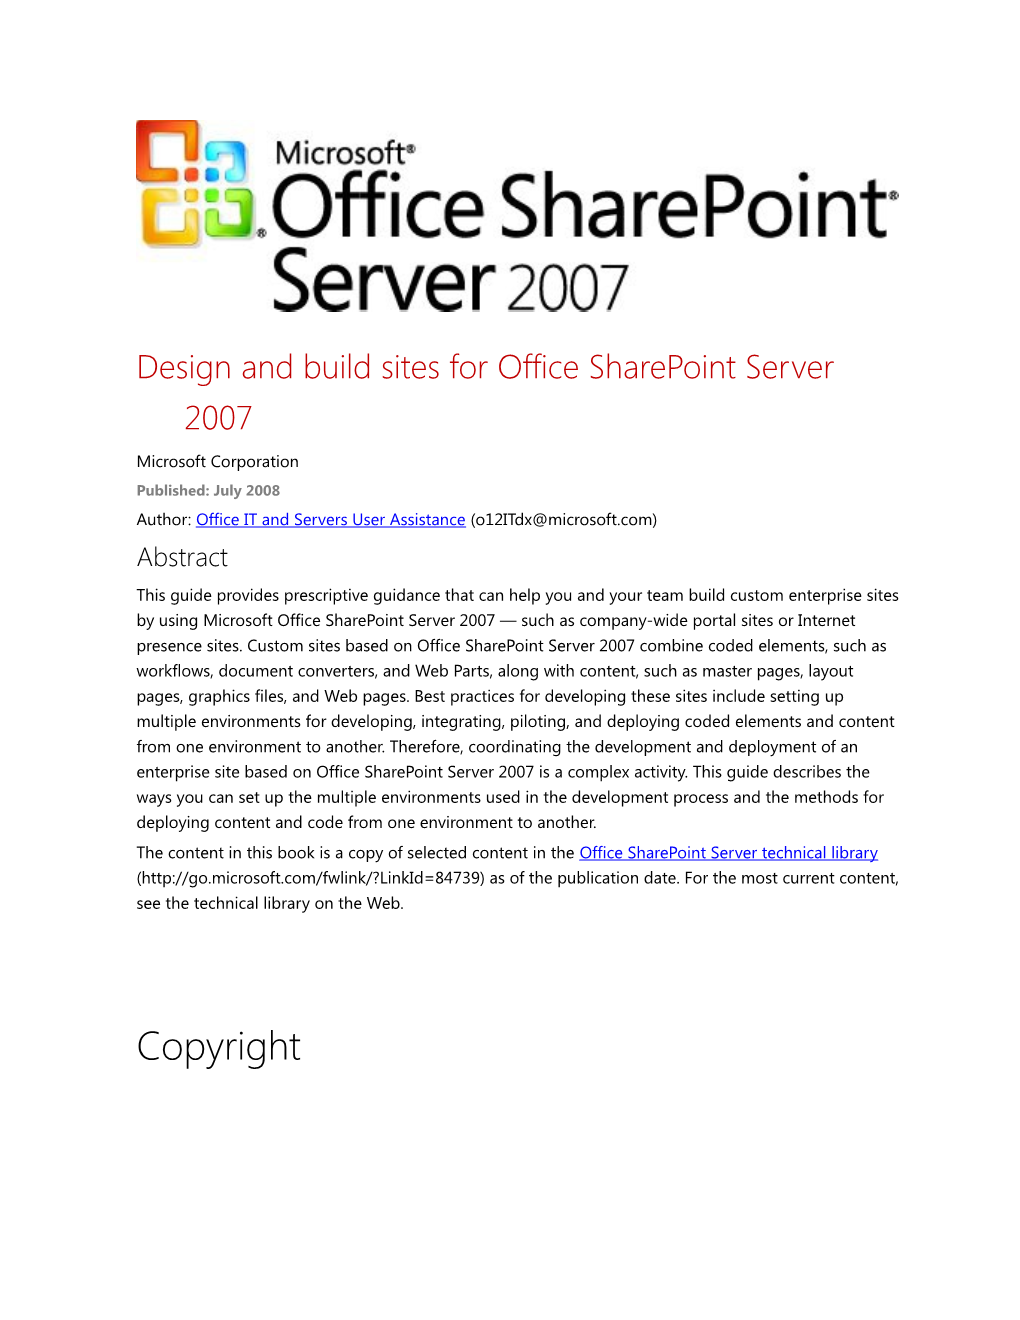 Design and Build Sites for Office Sharepoint Server 2007